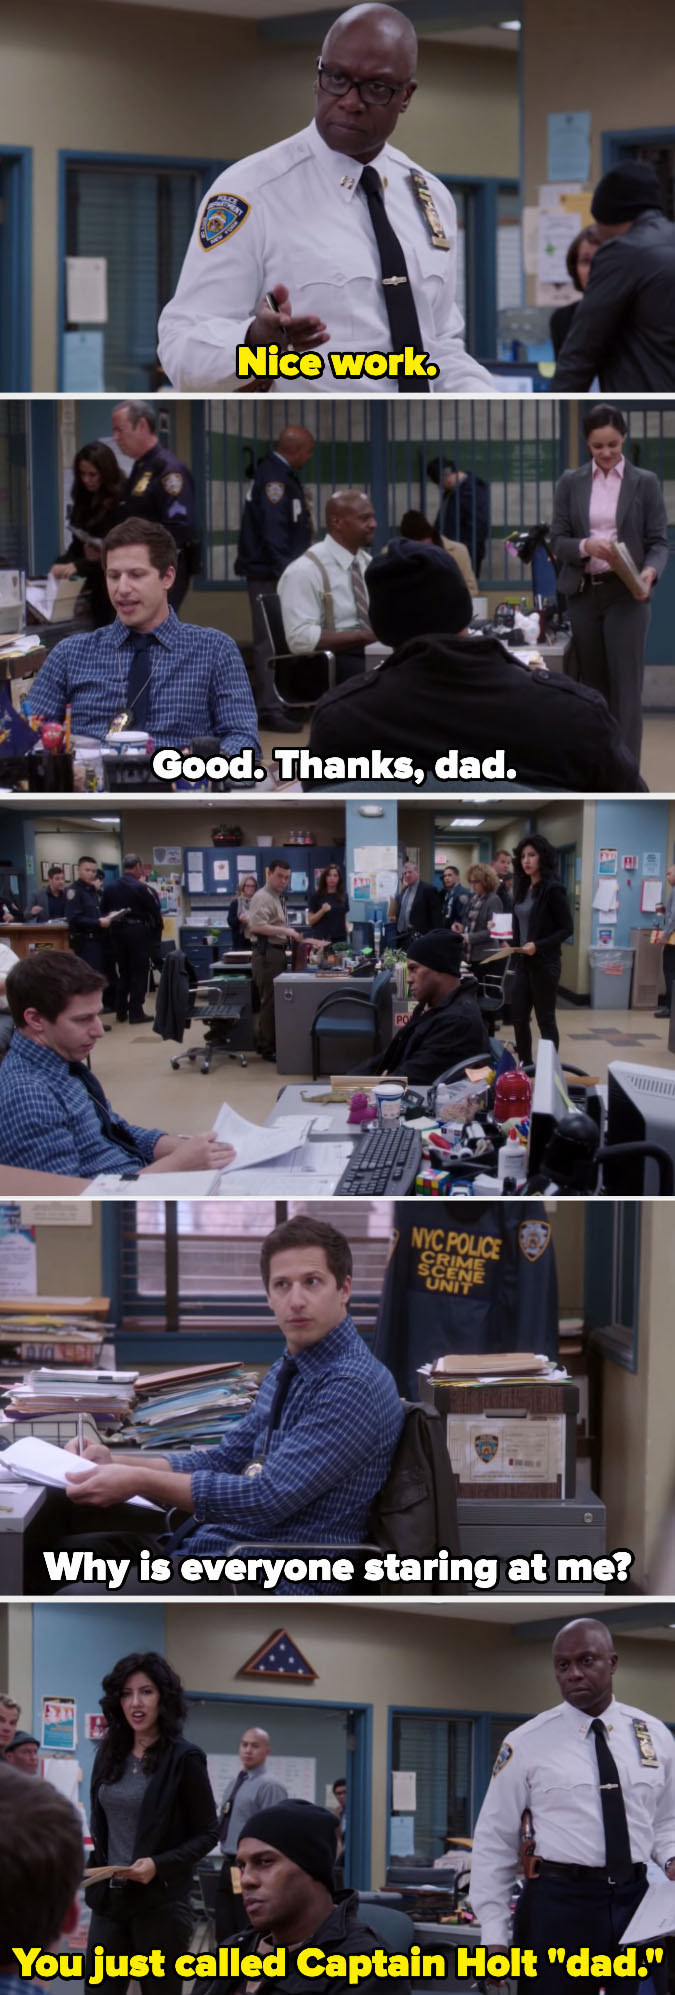 Jake calling Holt &quot;dad&quot; and everyone staring at him